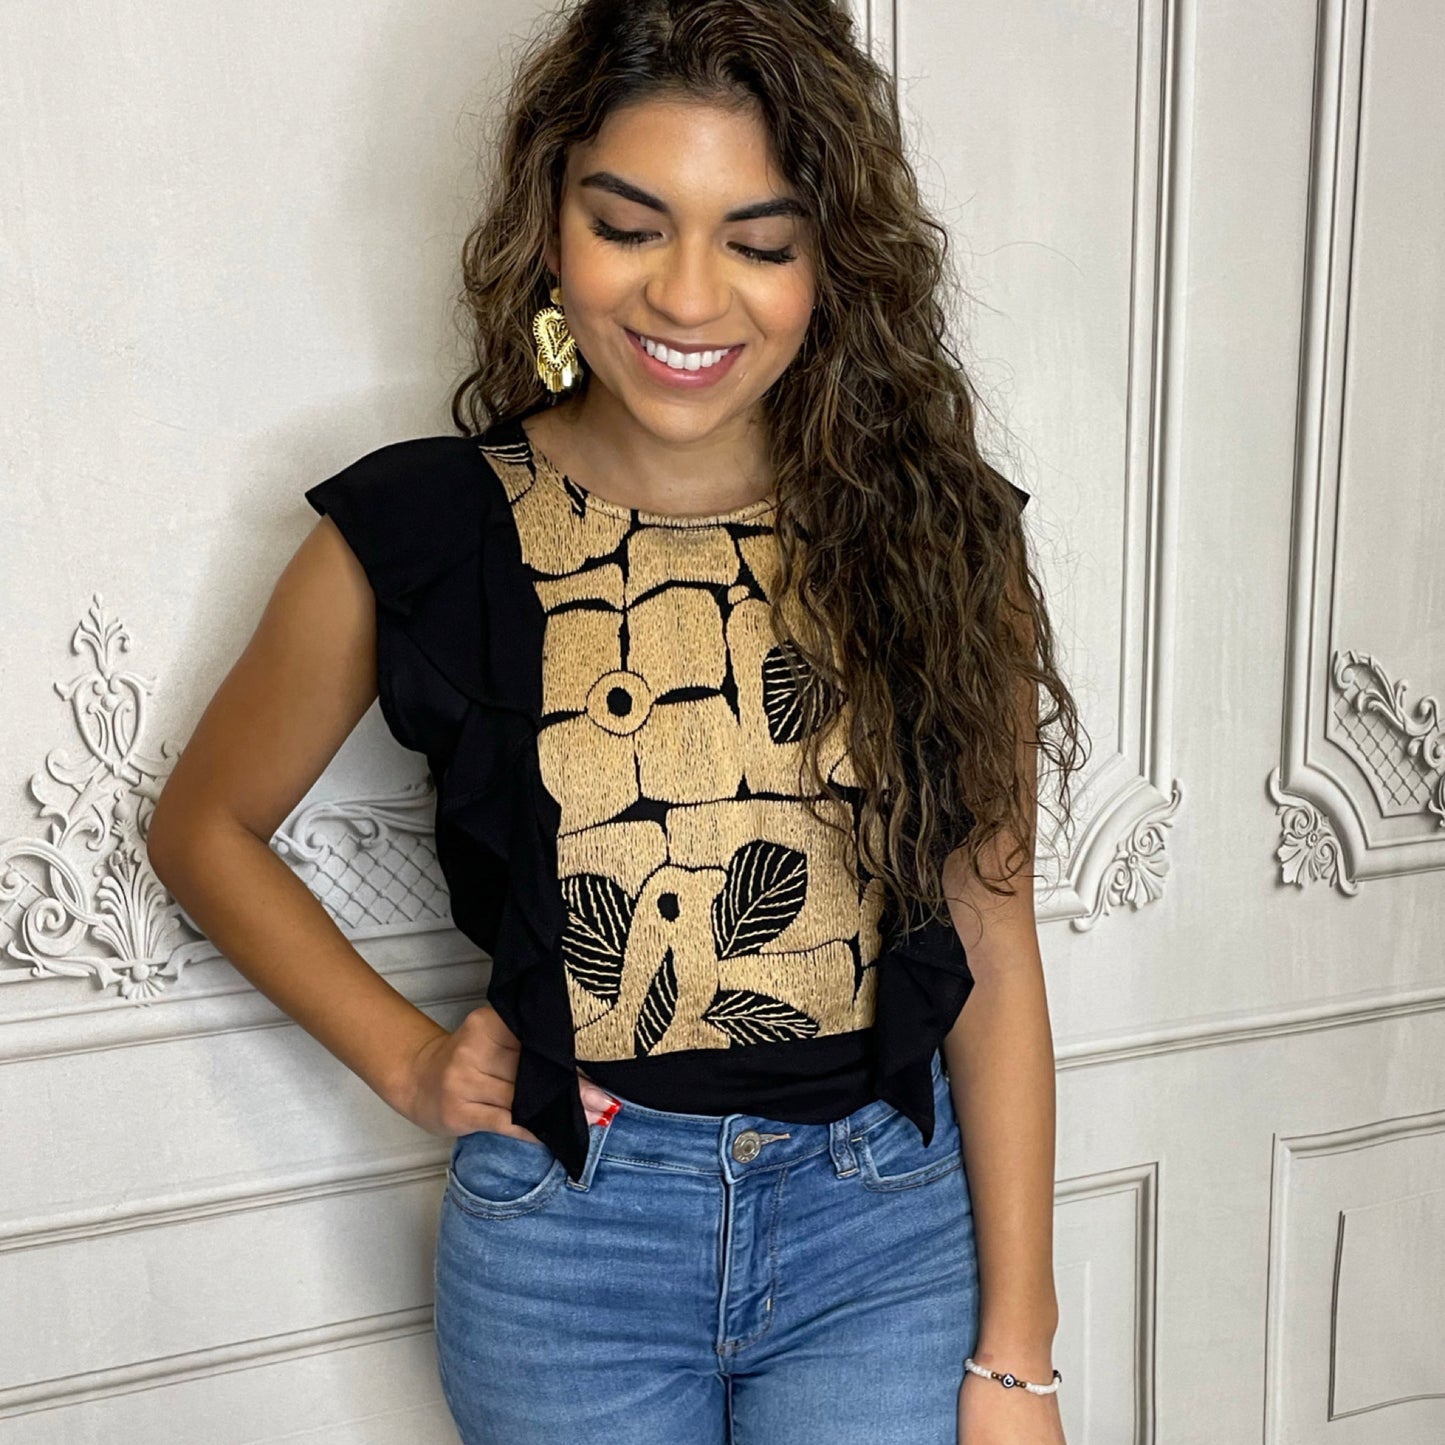 Jalapa Mexican Blouse - Butterfly Sleeve Crop Top